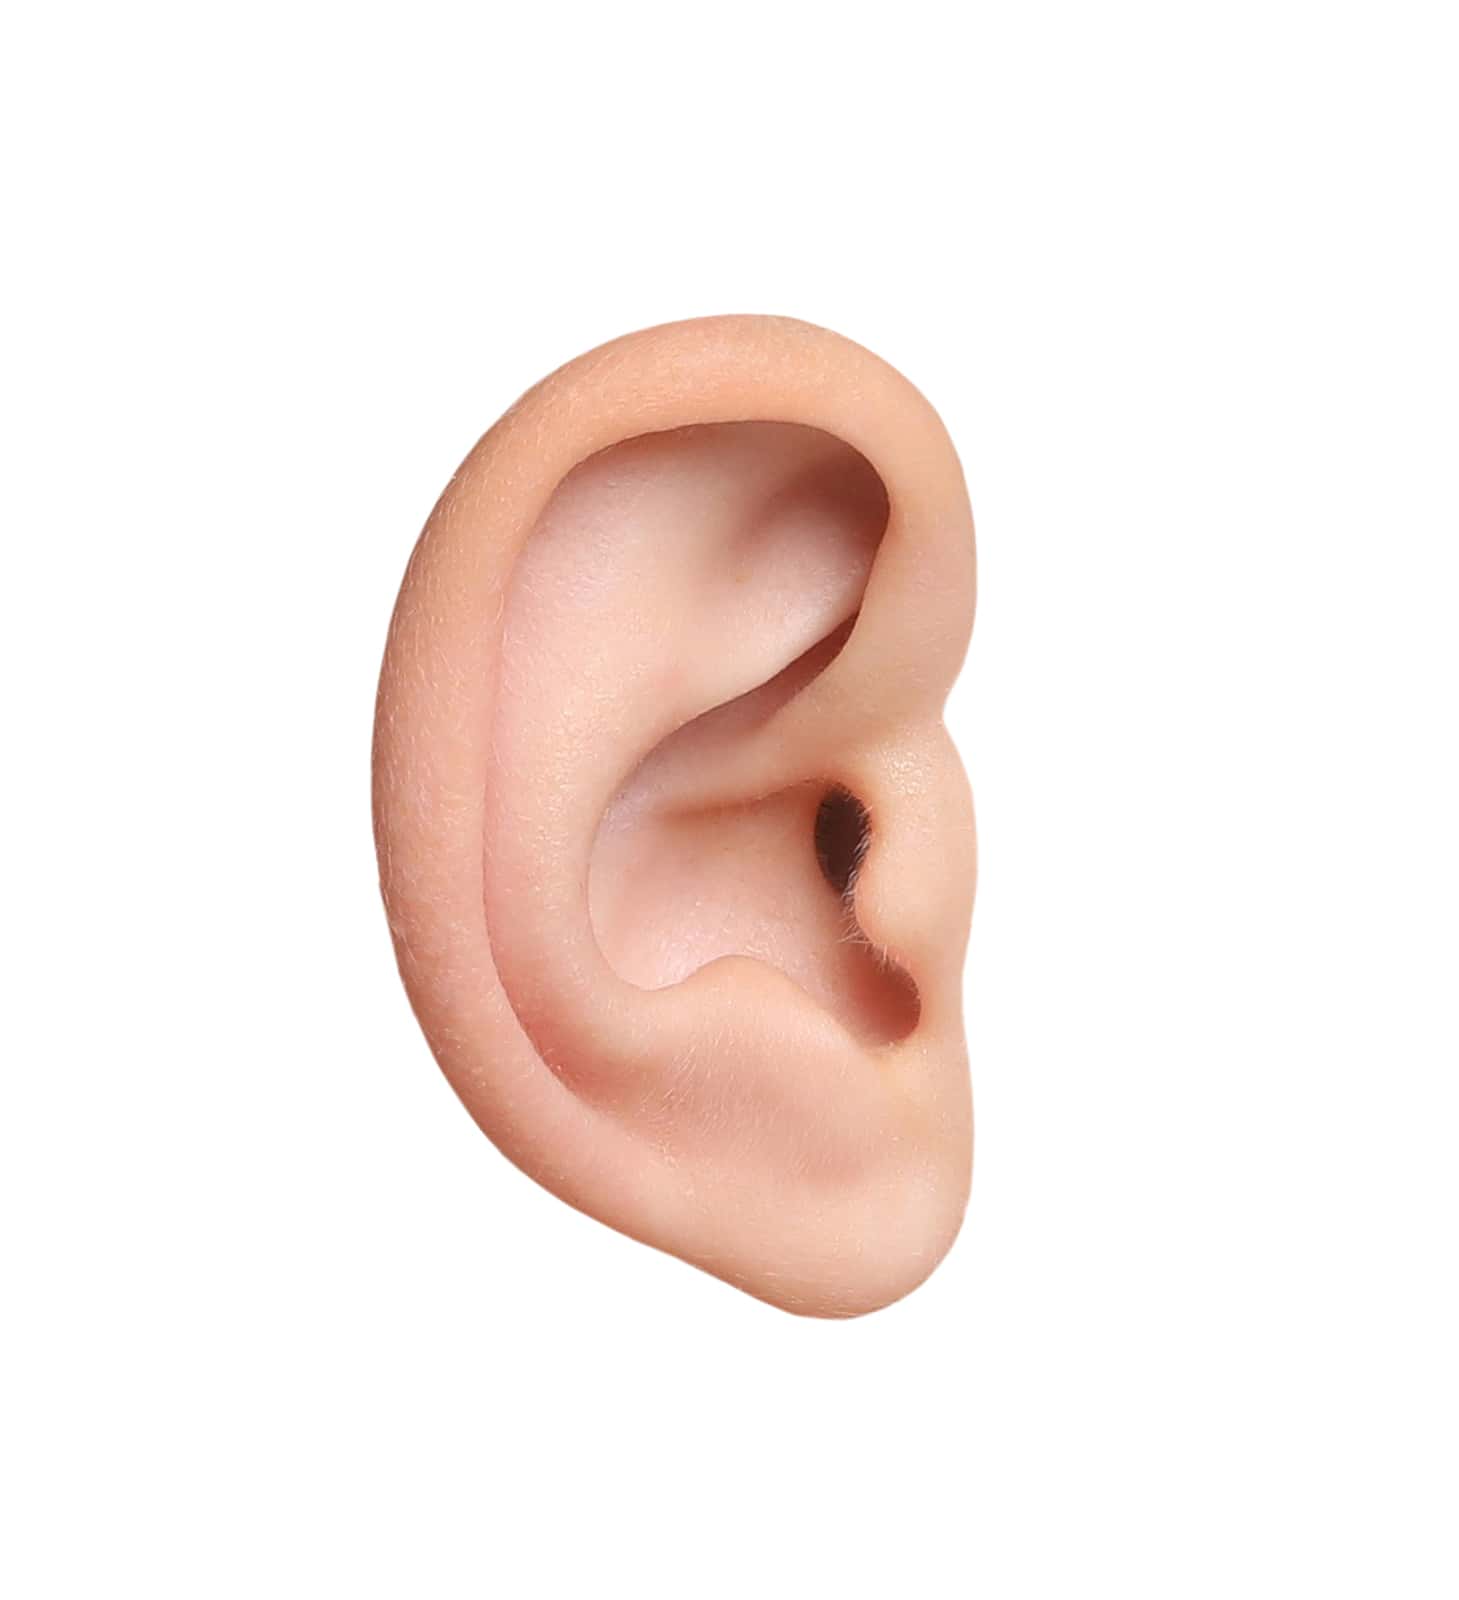 Tips for Cleaning Your Ears